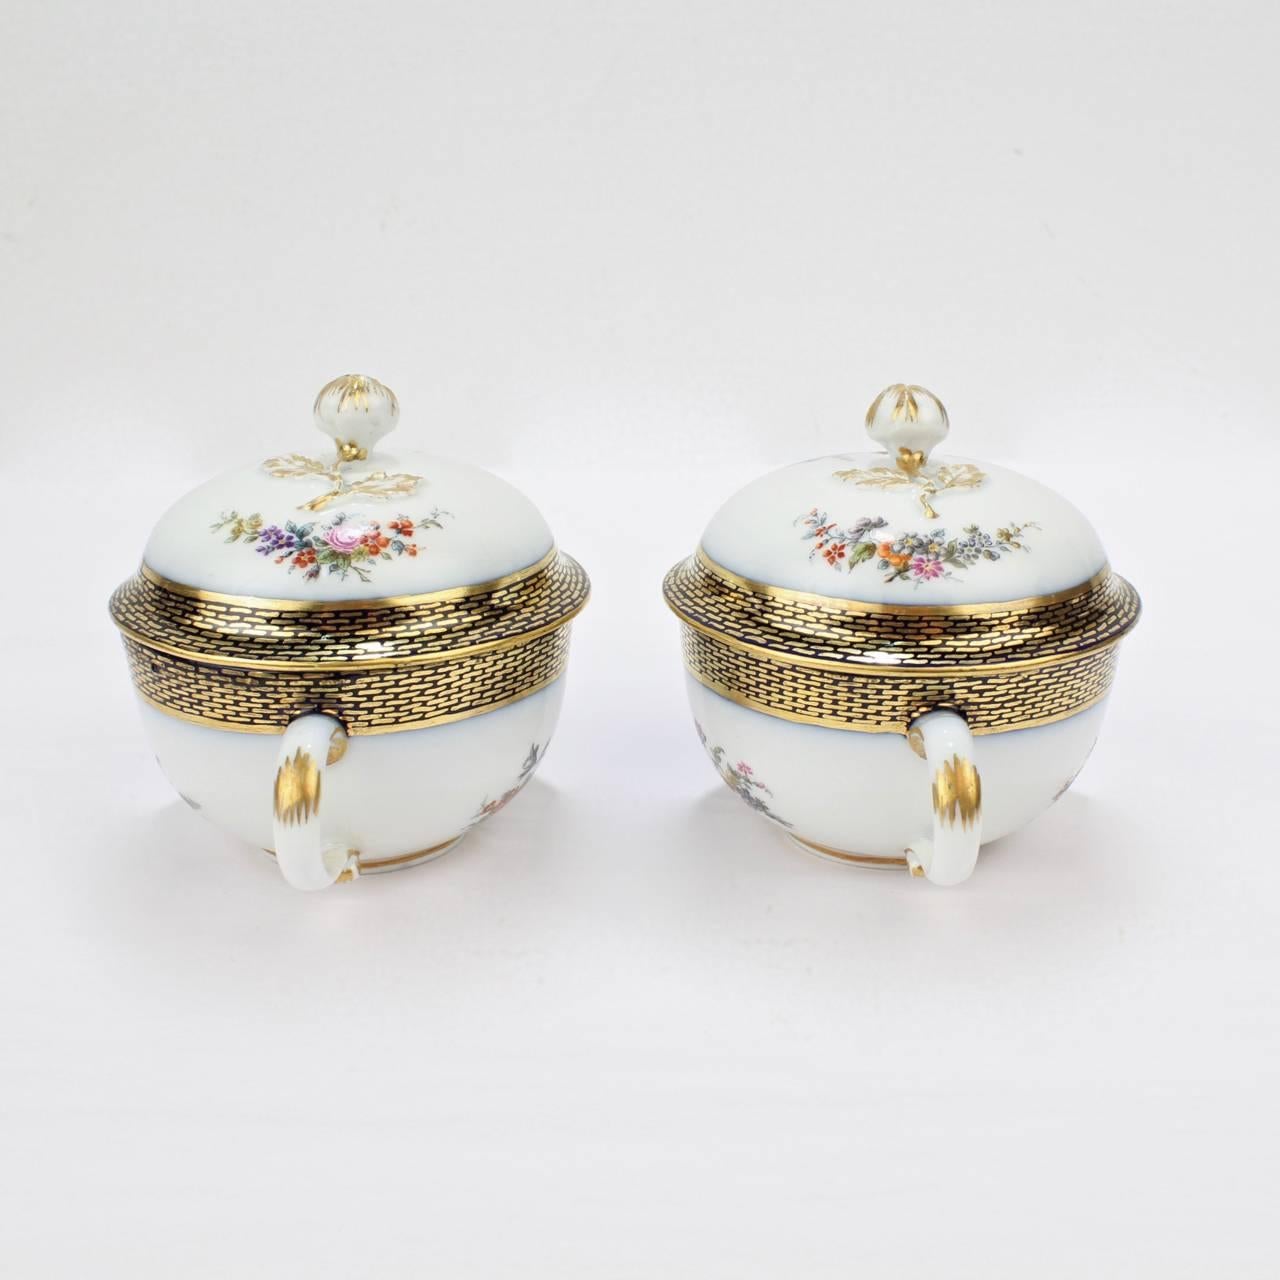 German Pair of Antique Meissen Porcelain Covered Tea Cups and Saucers, 19th Century